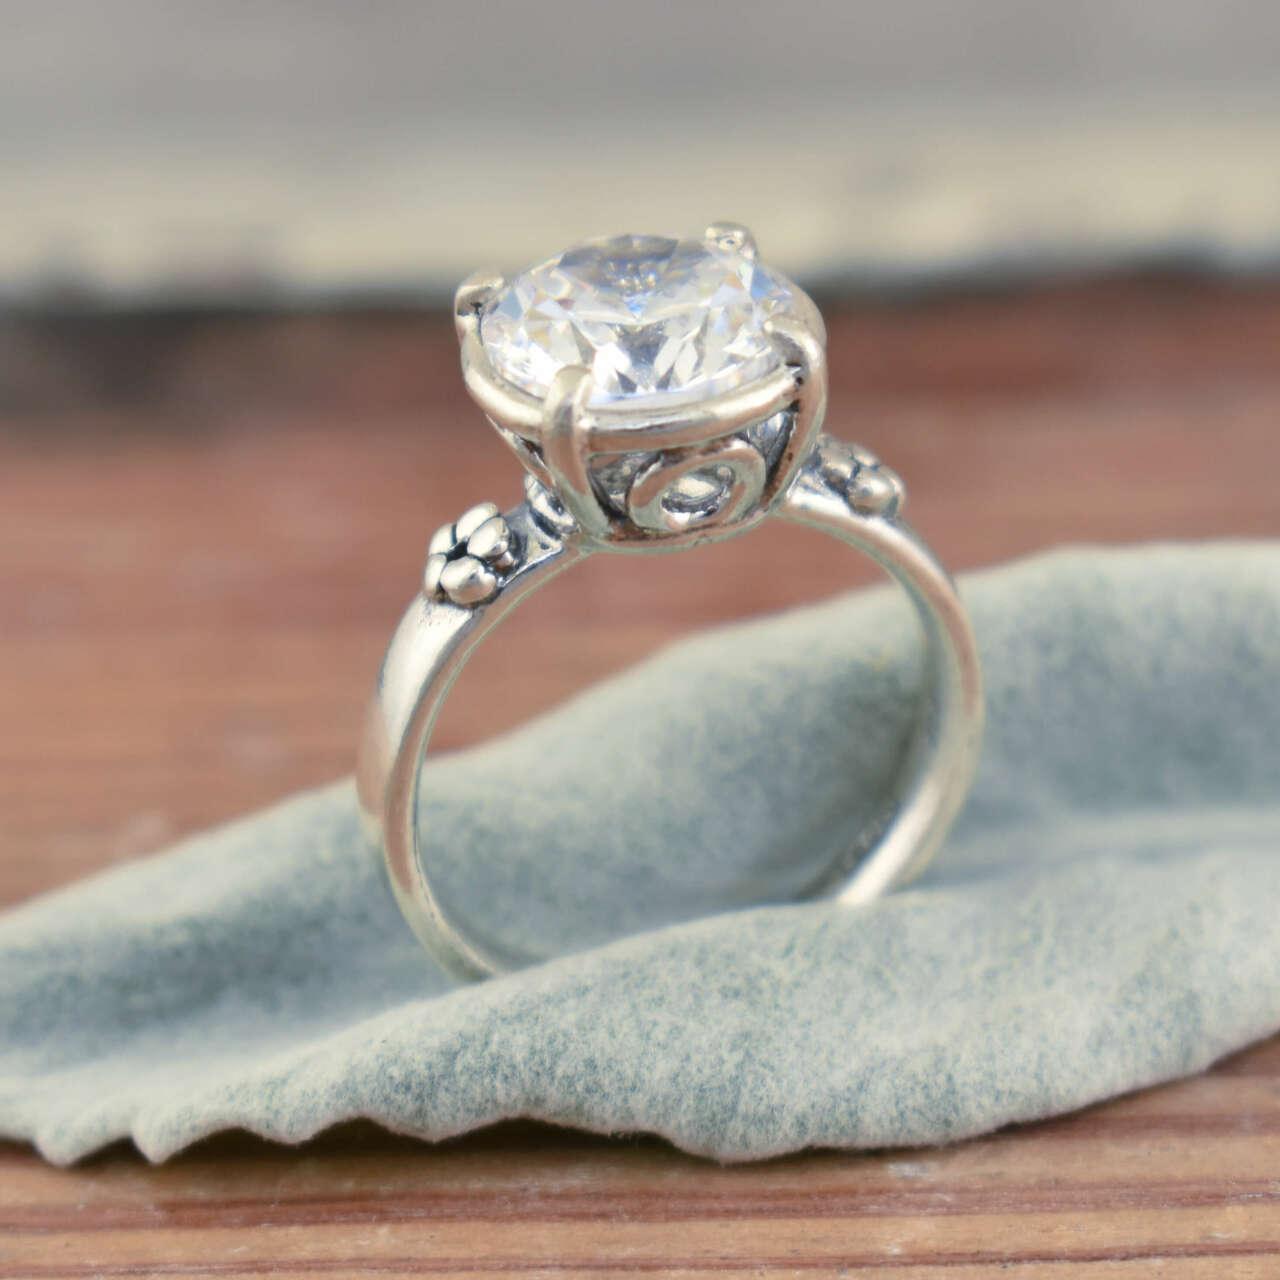 Rock the Block ring in .925 sterling silver and cz